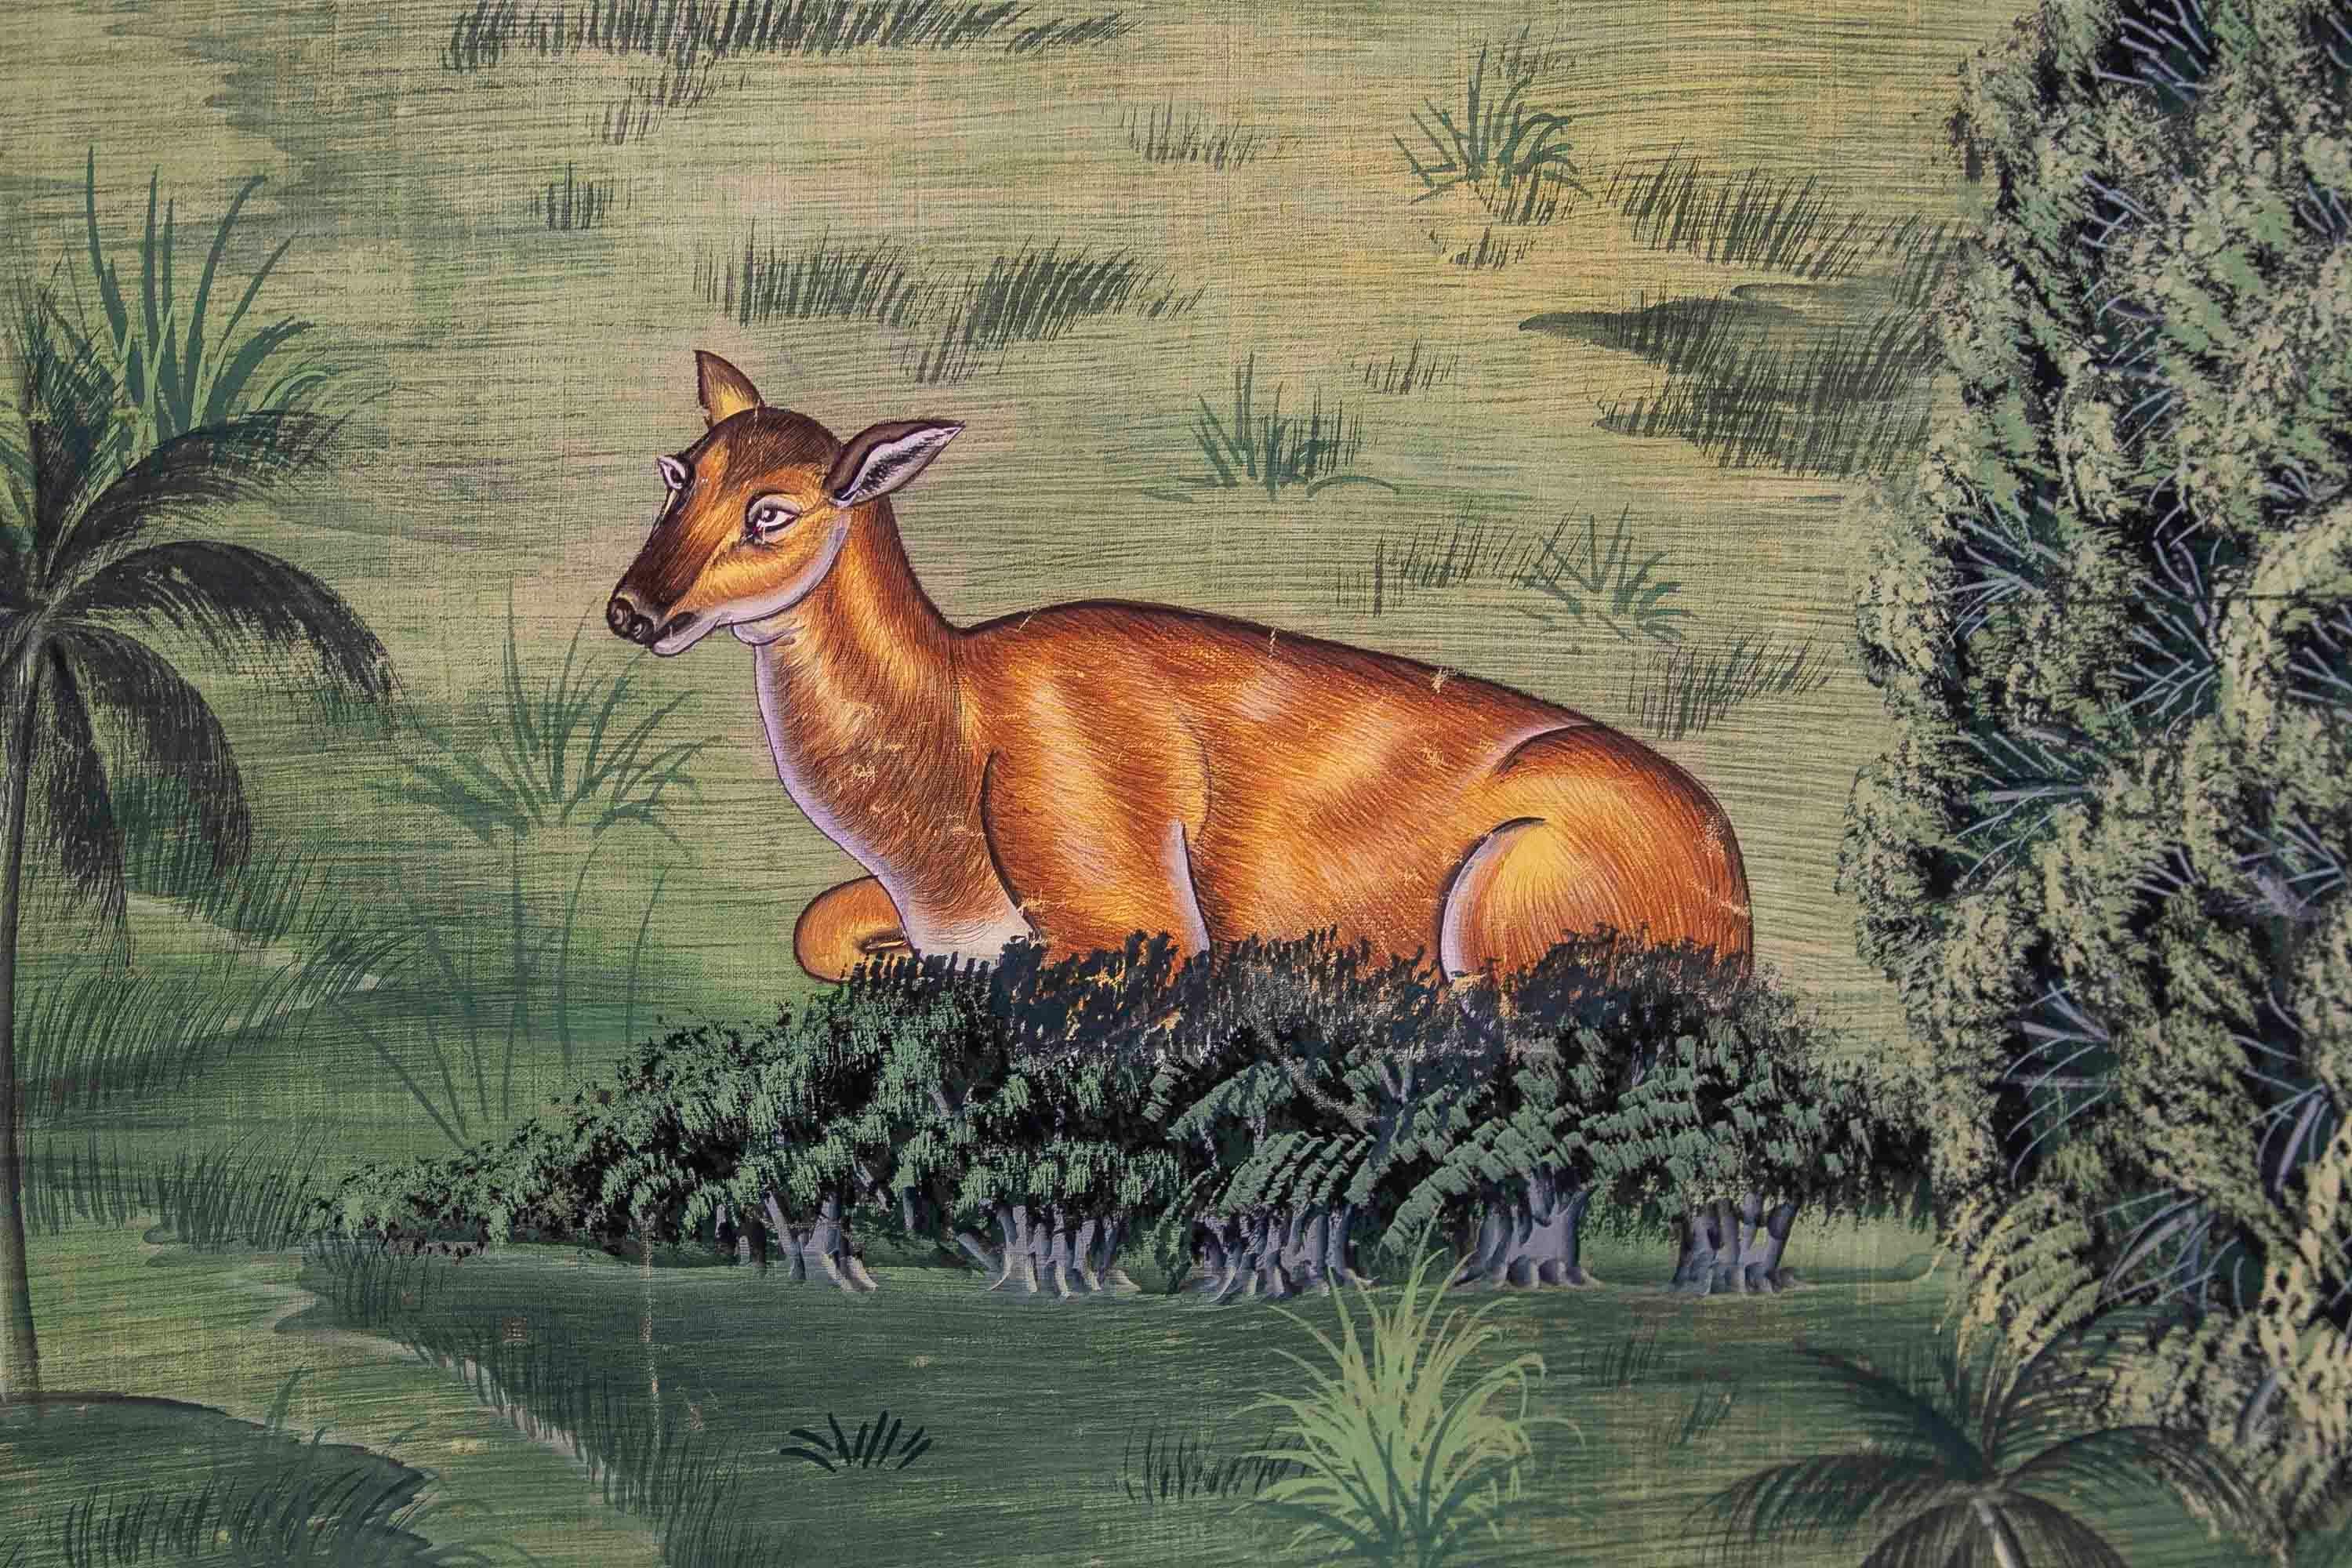 Painting on Canvas of a Landscape with Flowers and Animals Such as Deer For Sale 12